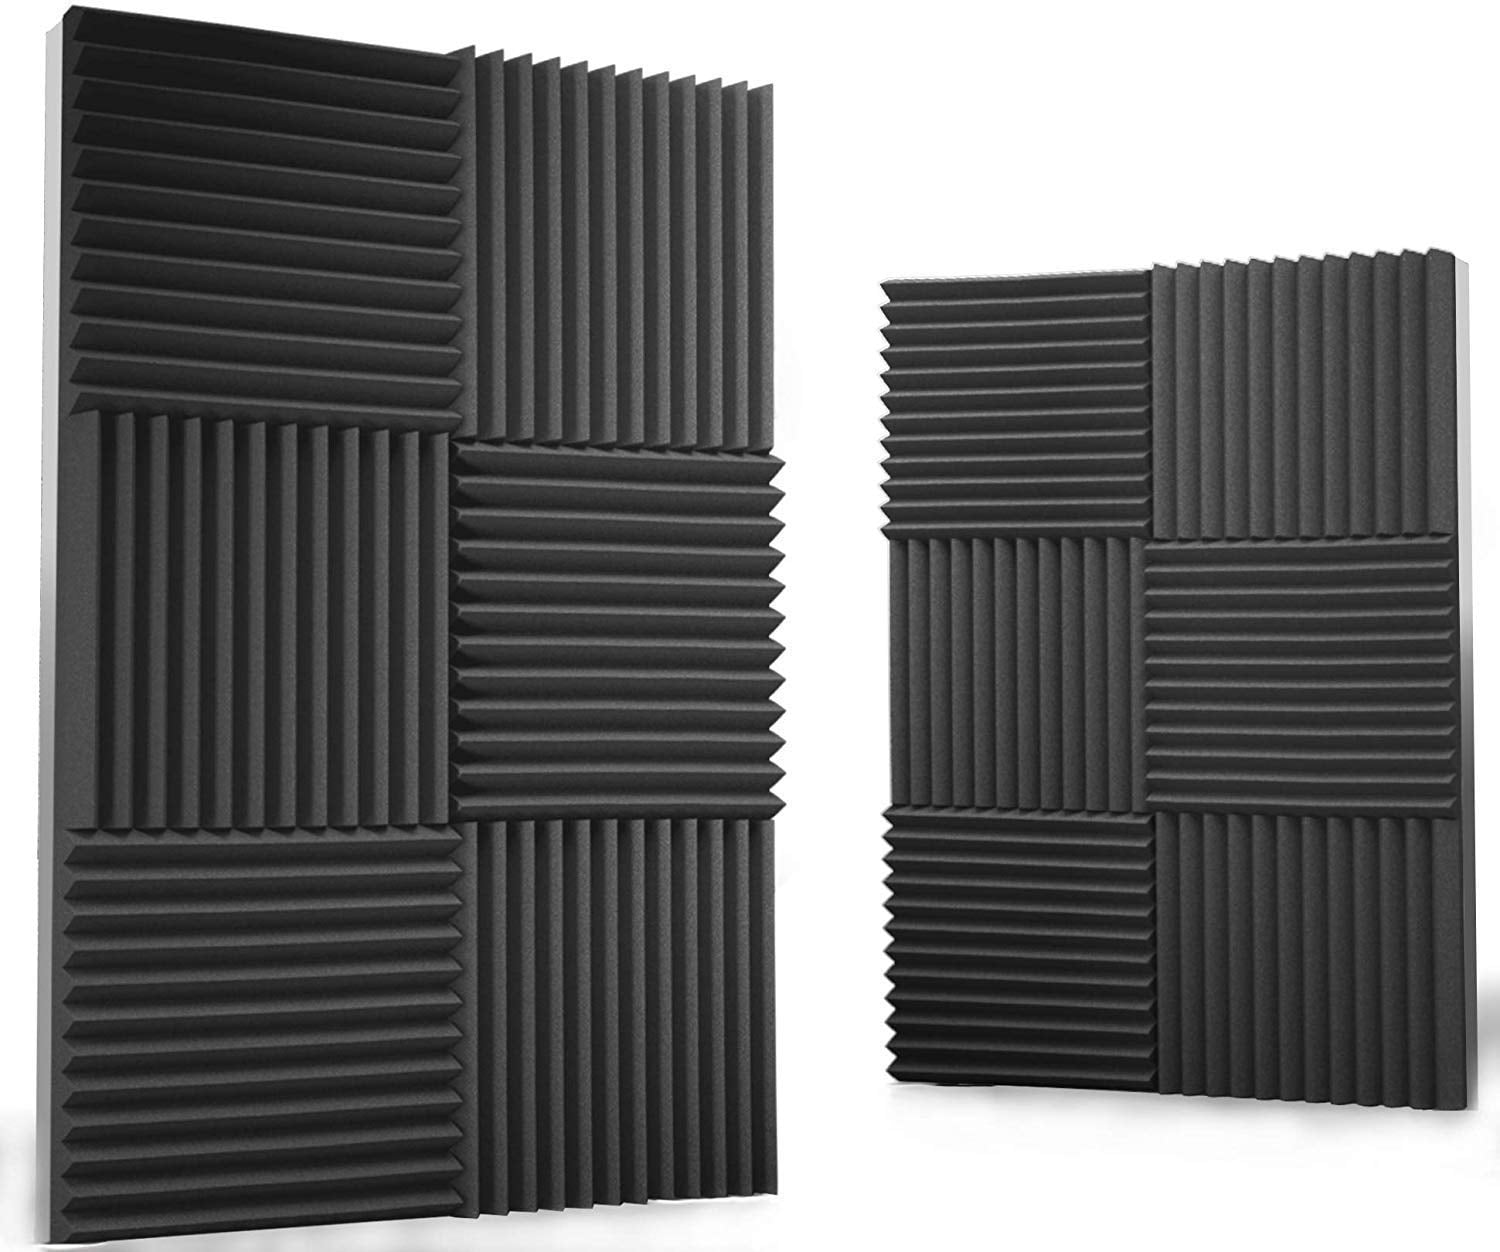 UPWADE 12 Pack 2x12x12 Acoustic Foam Panels with High Density Sound Foam Panels for Recording Studio Room and Office Black Self-adhesive sound proofing padding for wall Sound Proof Foam Panels